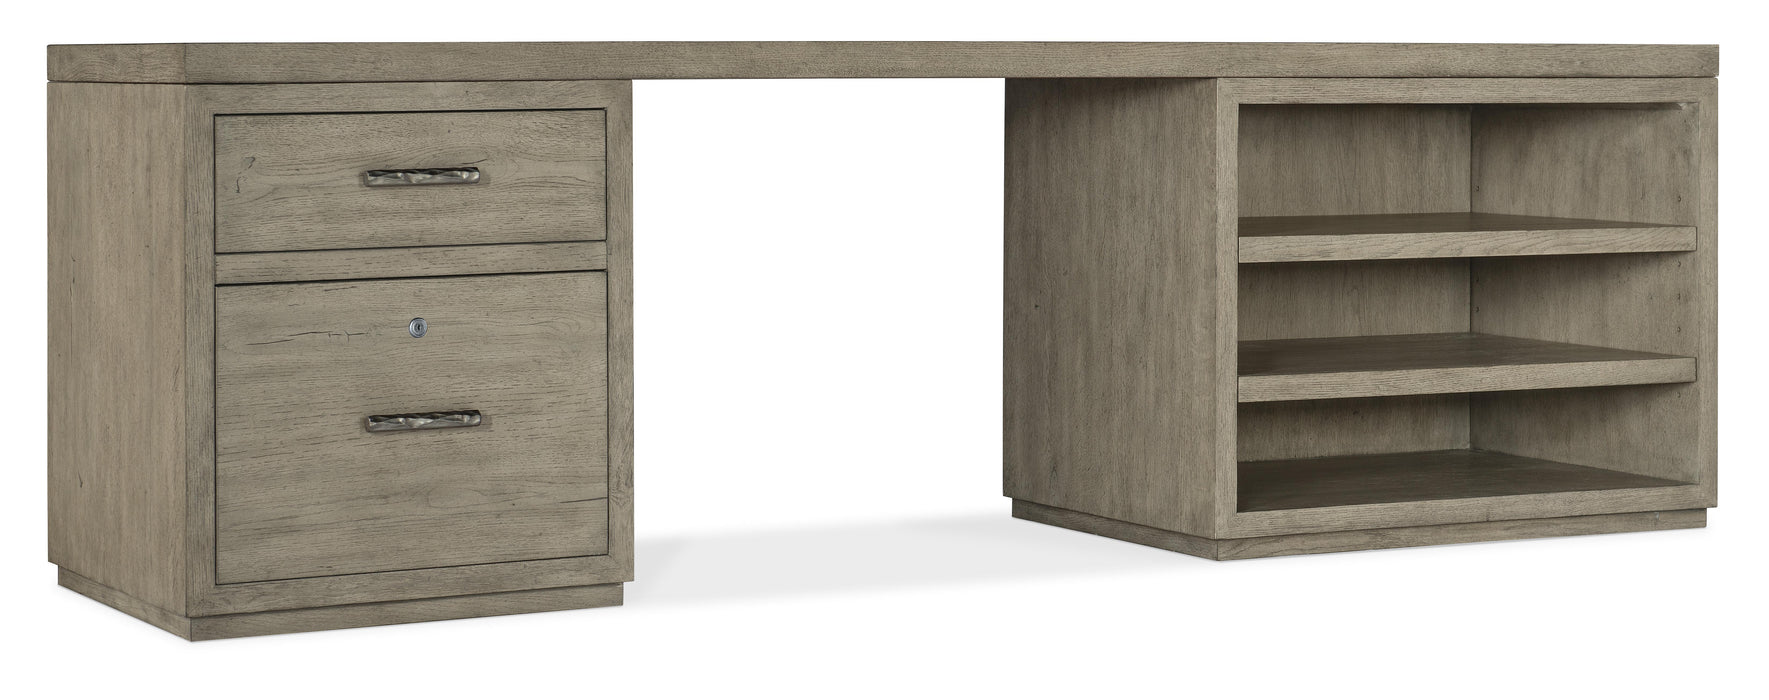 Linville Falls 96" Desk with One File and Open Desk Cabinet